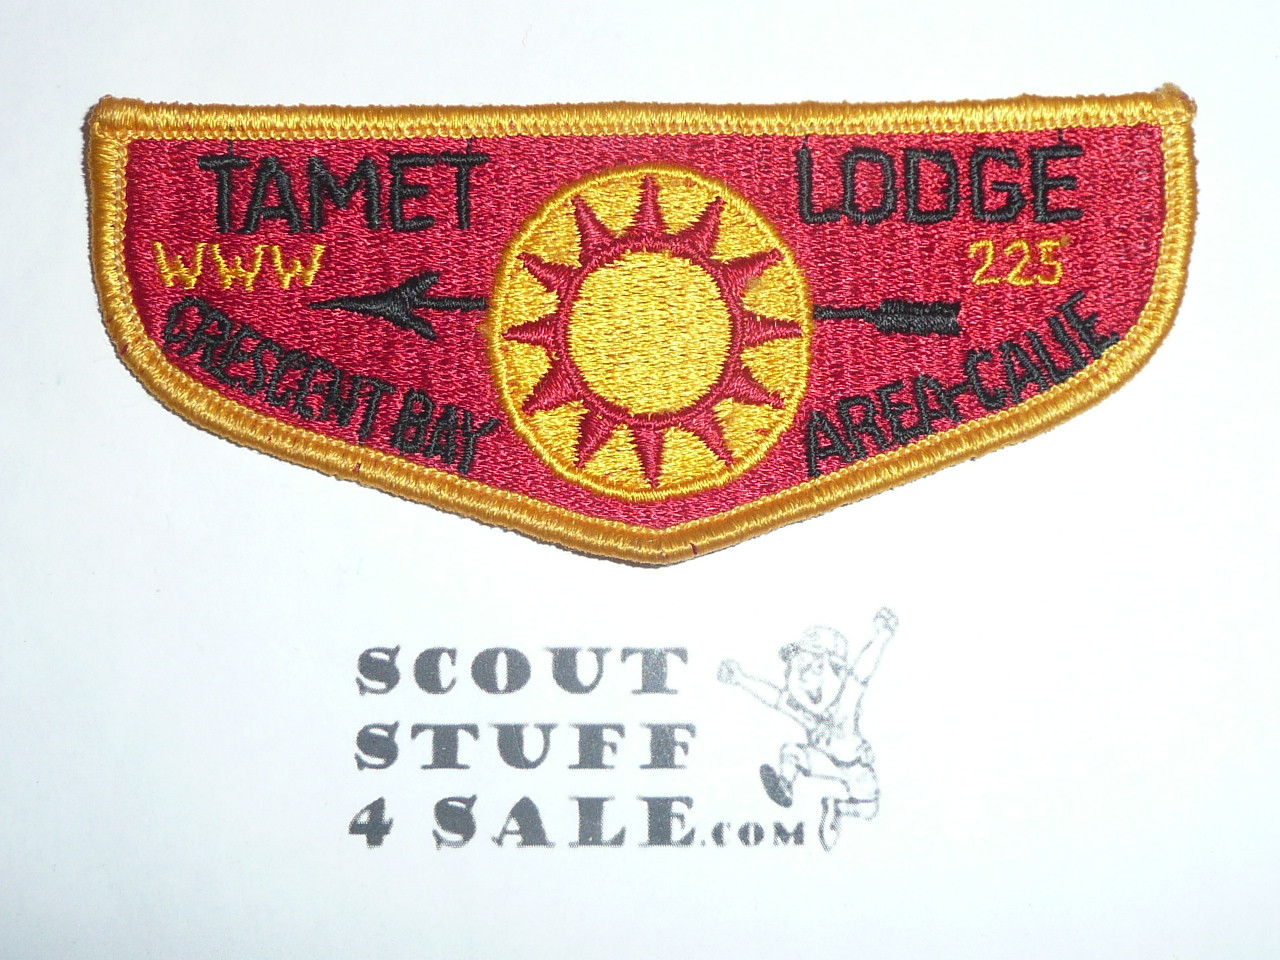 Order of the Arrow Lodge #225 Tamet s3 Flap Patch